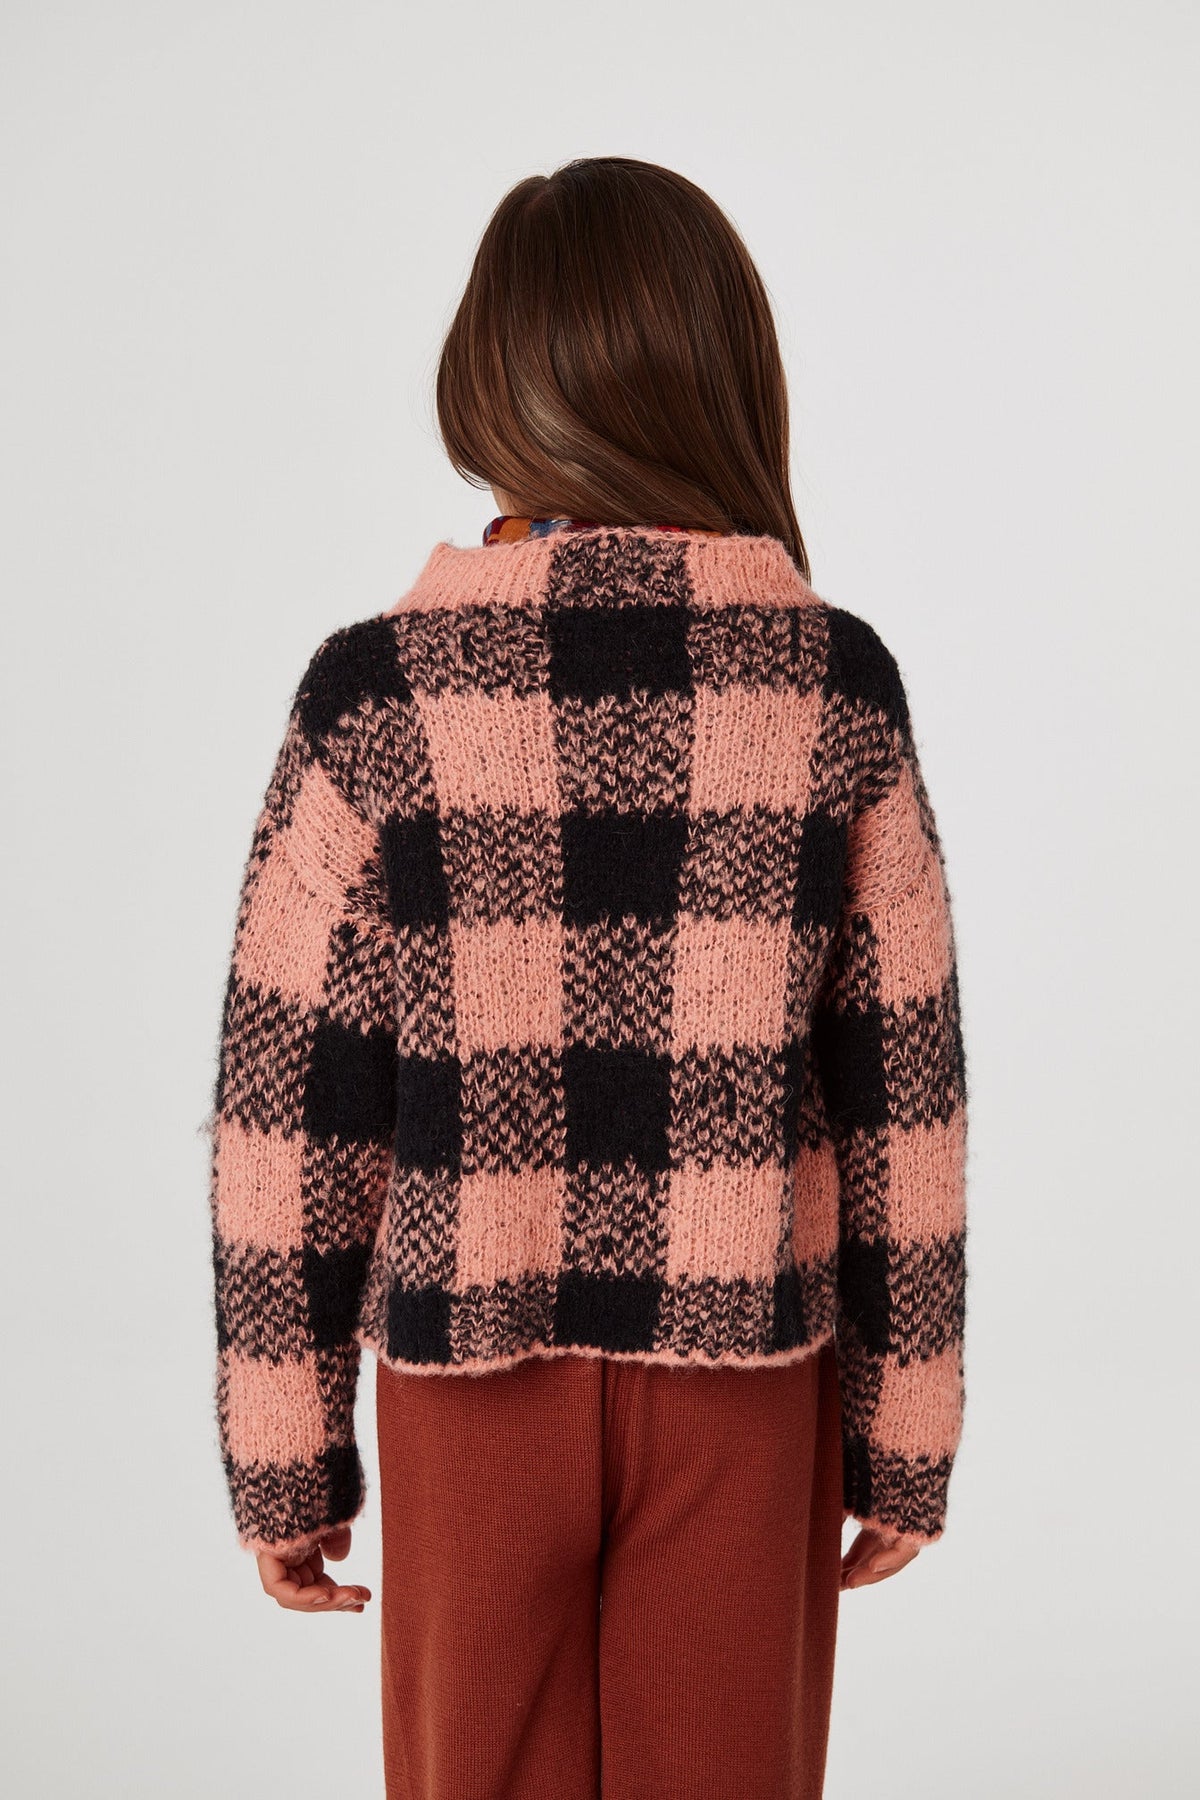 Boucle Plaid Pullover - Grapefruit+Model is 48 inches tall, 51lbs, wearing a size 7-8y